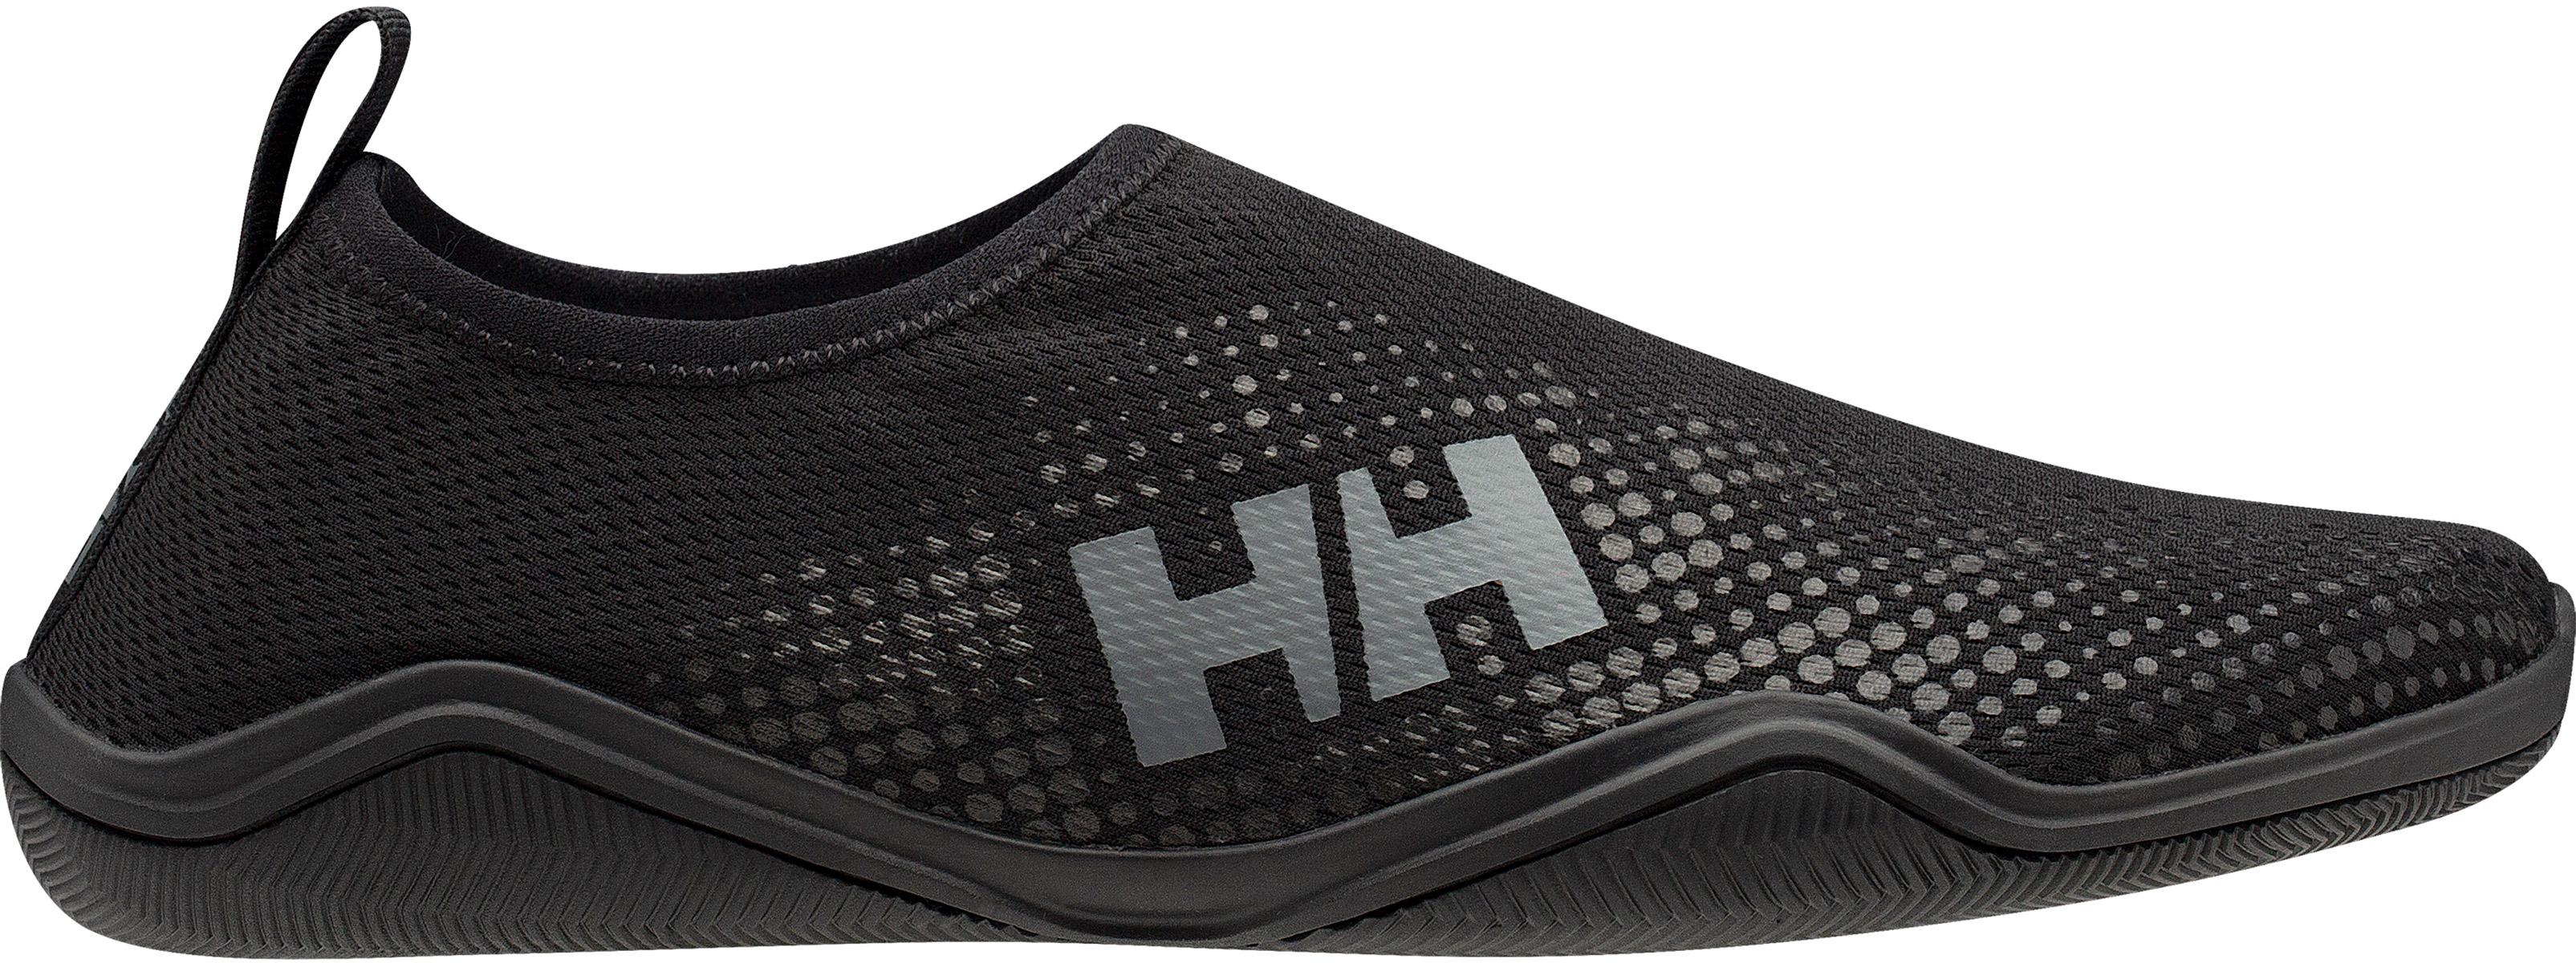 Image of Chaussures Helly Hansen Crest Watermoc - Black/Charcoal